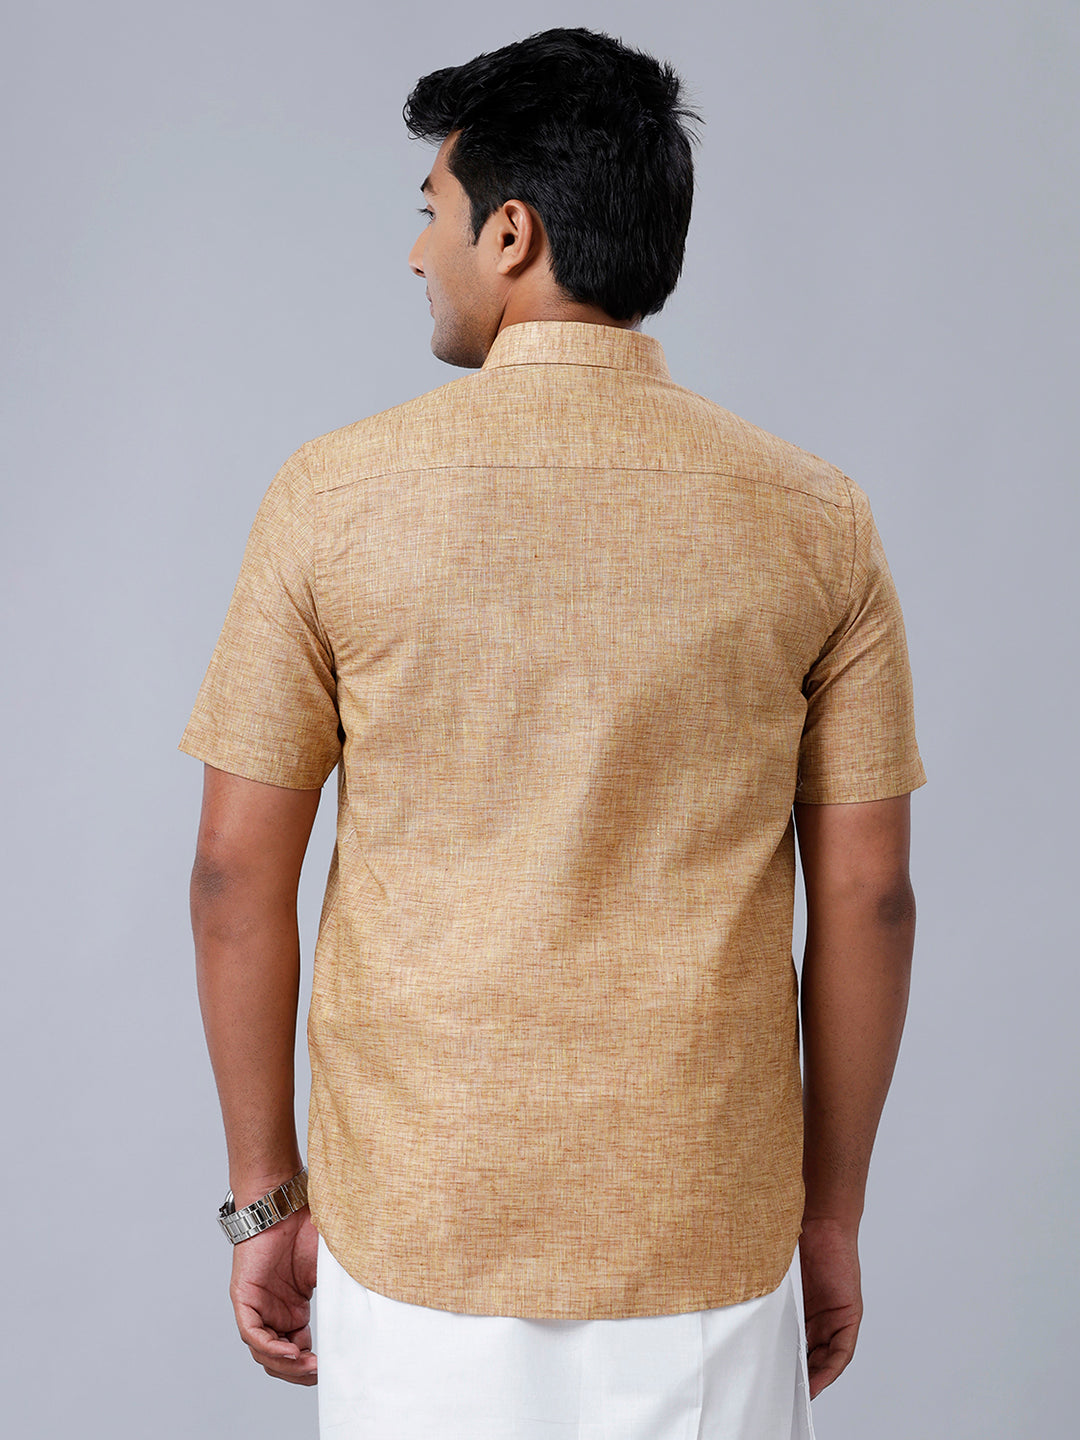 Mens Formal Shirt Half Sleeves Brown T39 TO6-Back view